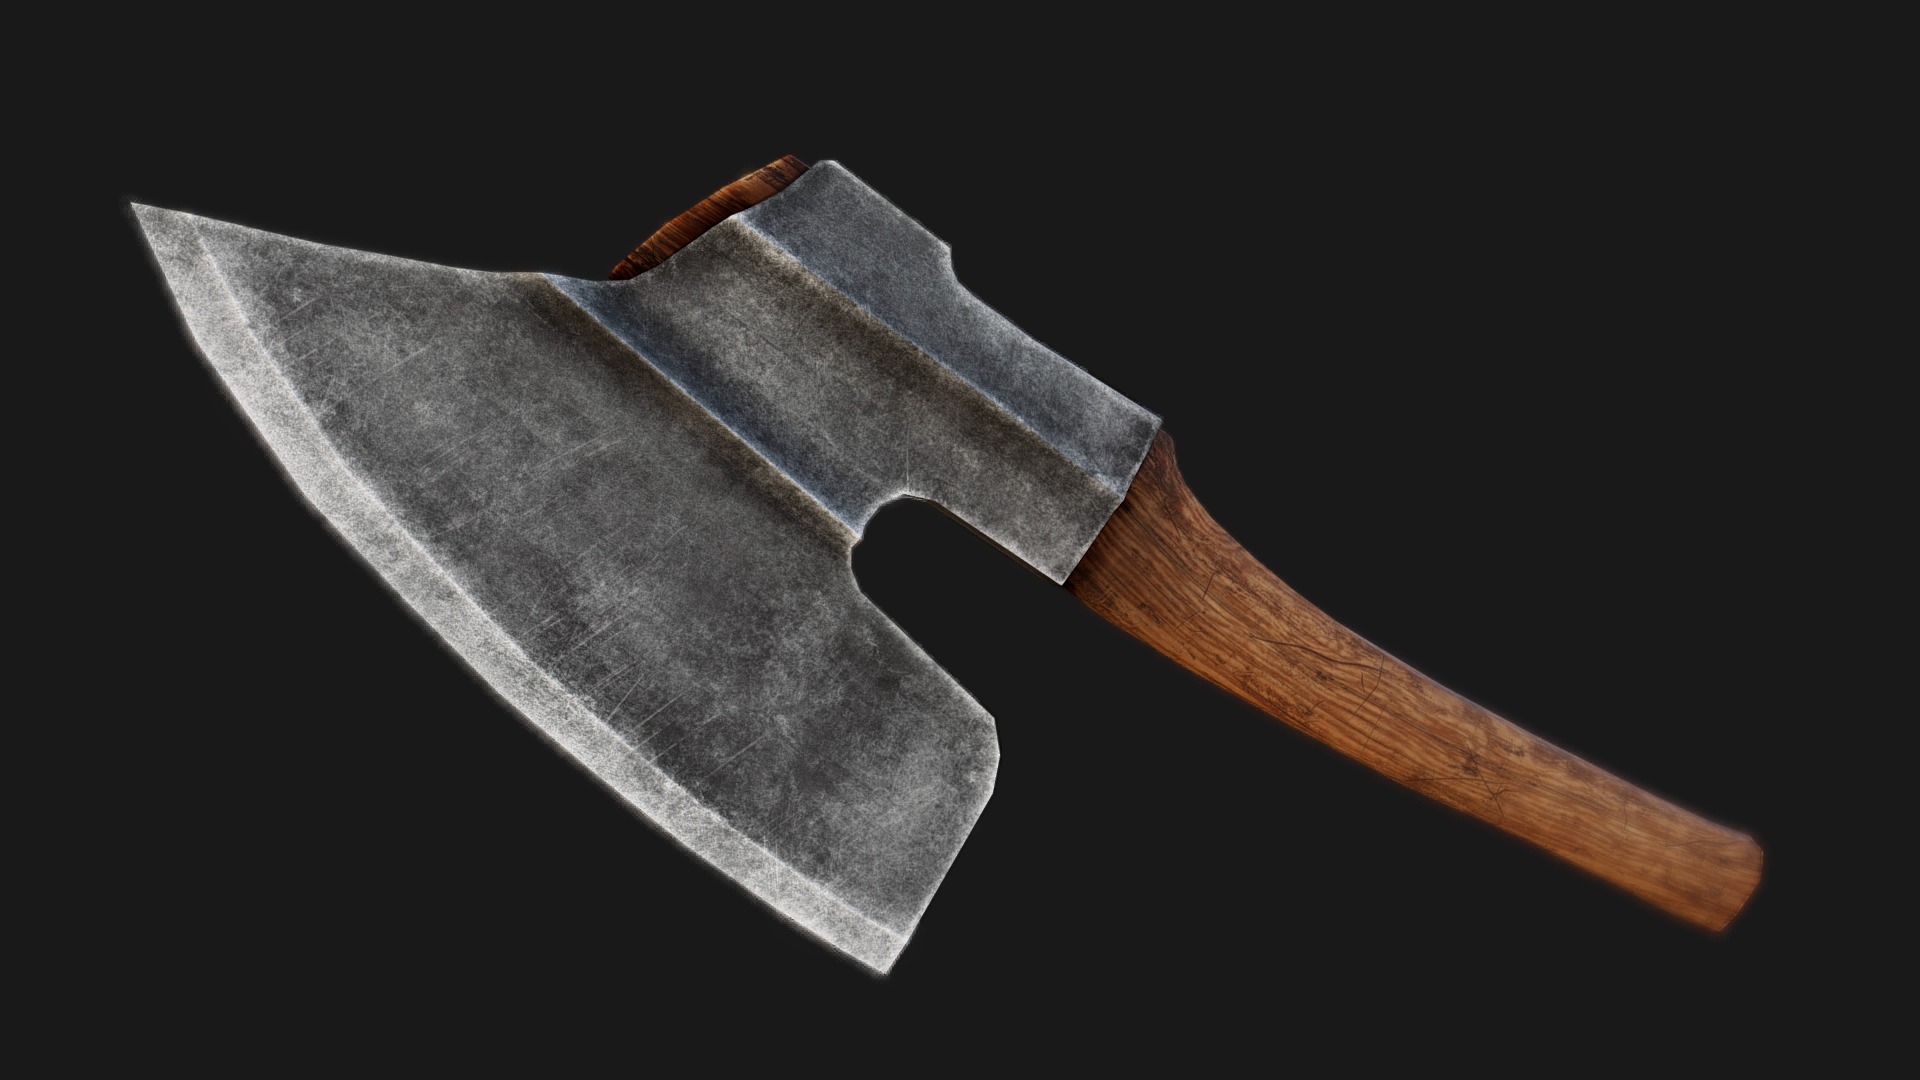 3D model Goosewing Hewing Axe - This is a 3D model of the Goosewing Hewing Axe. The 3D model is about a wooden axe with a wooden handle.